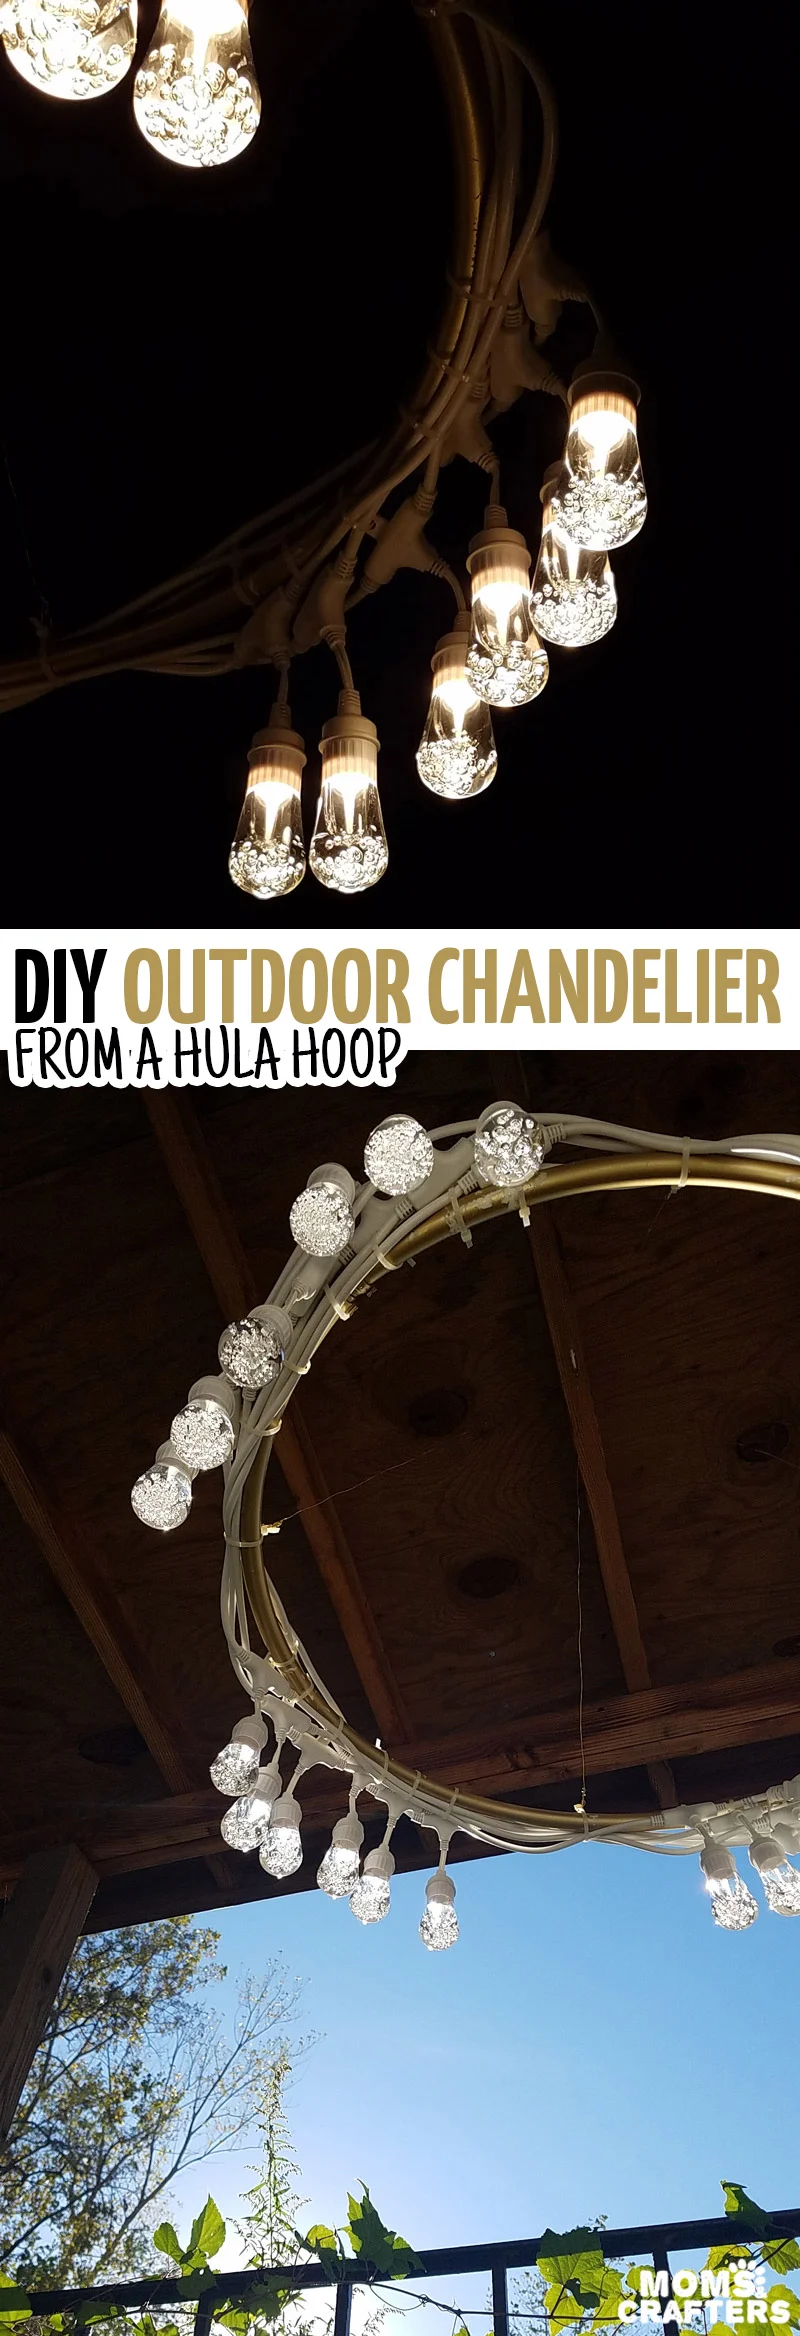 Make a beautiful DIY outdoor chandelier - beautiful and functional patio decor! It's a great way to update your outdoor space.